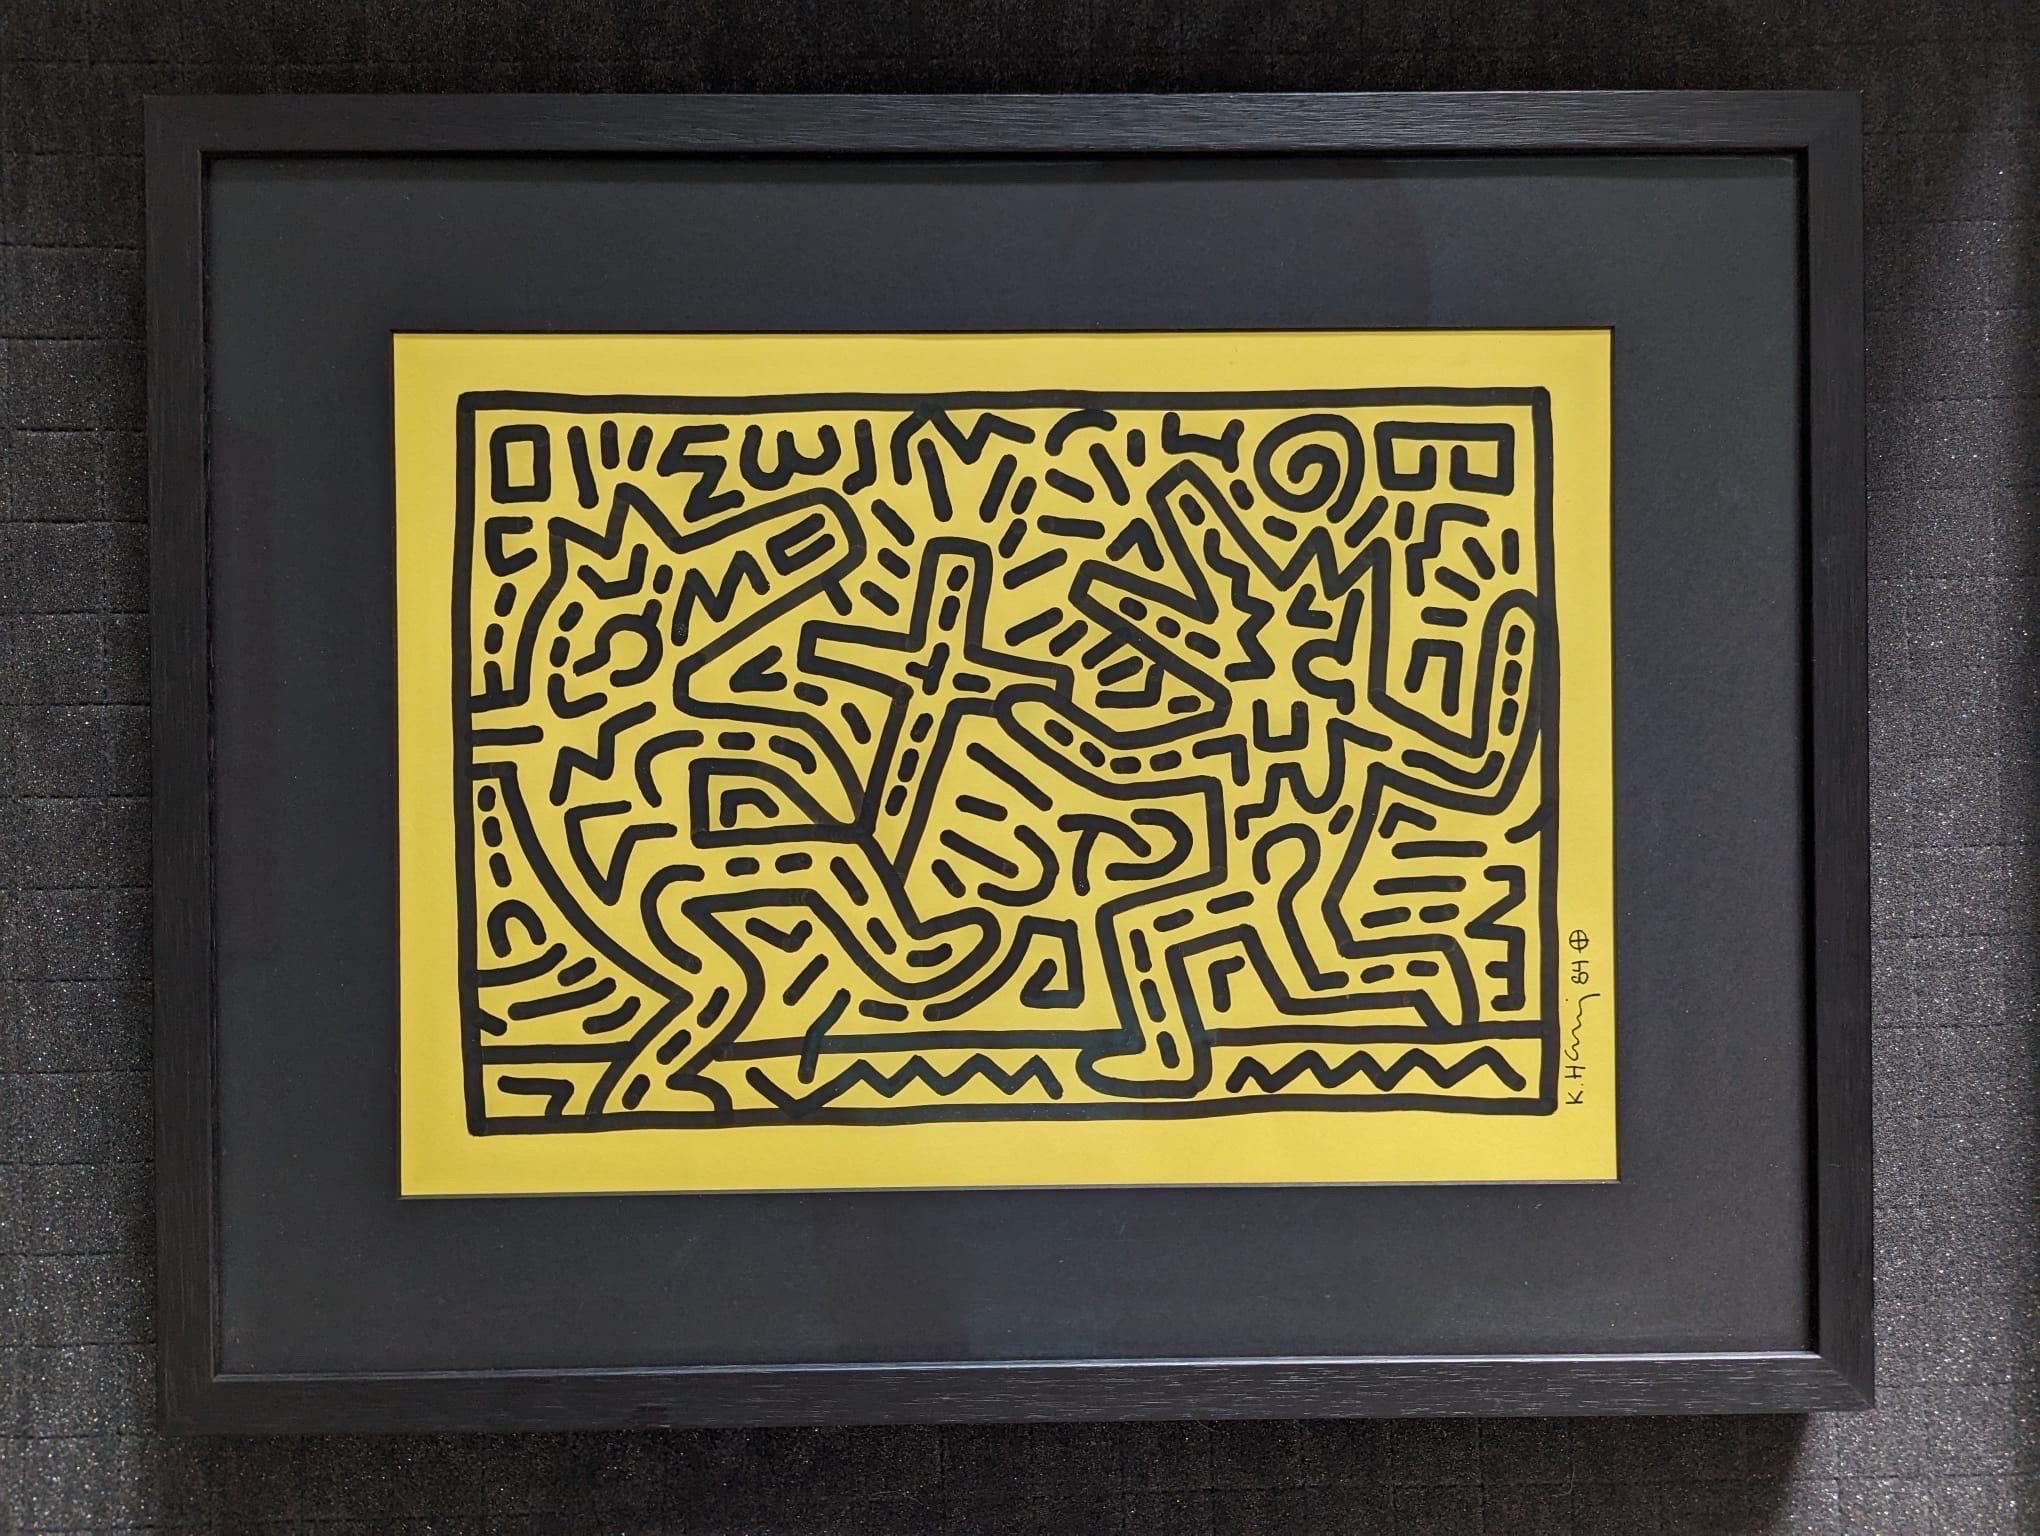 Keith Haring, Untitled, 1984

Ink on yellow wove paper

Hand-signed and dated in ink in the lower portion of the right margin: K Haring

11.75 x 16.5 in (30 x 42 cm)

Certificate of Authenticity on reverse signed by the estate executor, Julia Gruen,